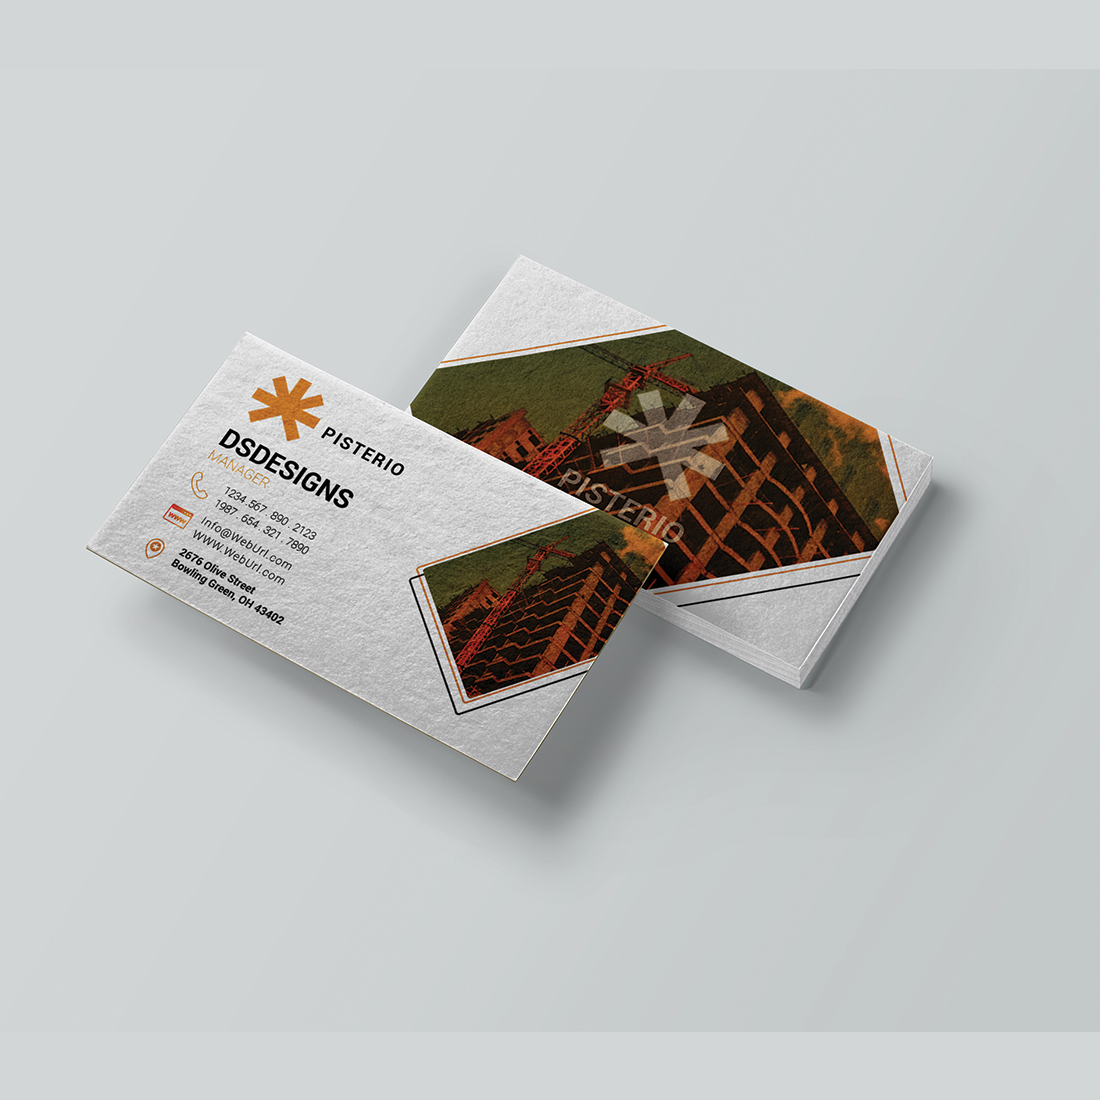 Construction business card design in just 5$ preview image.